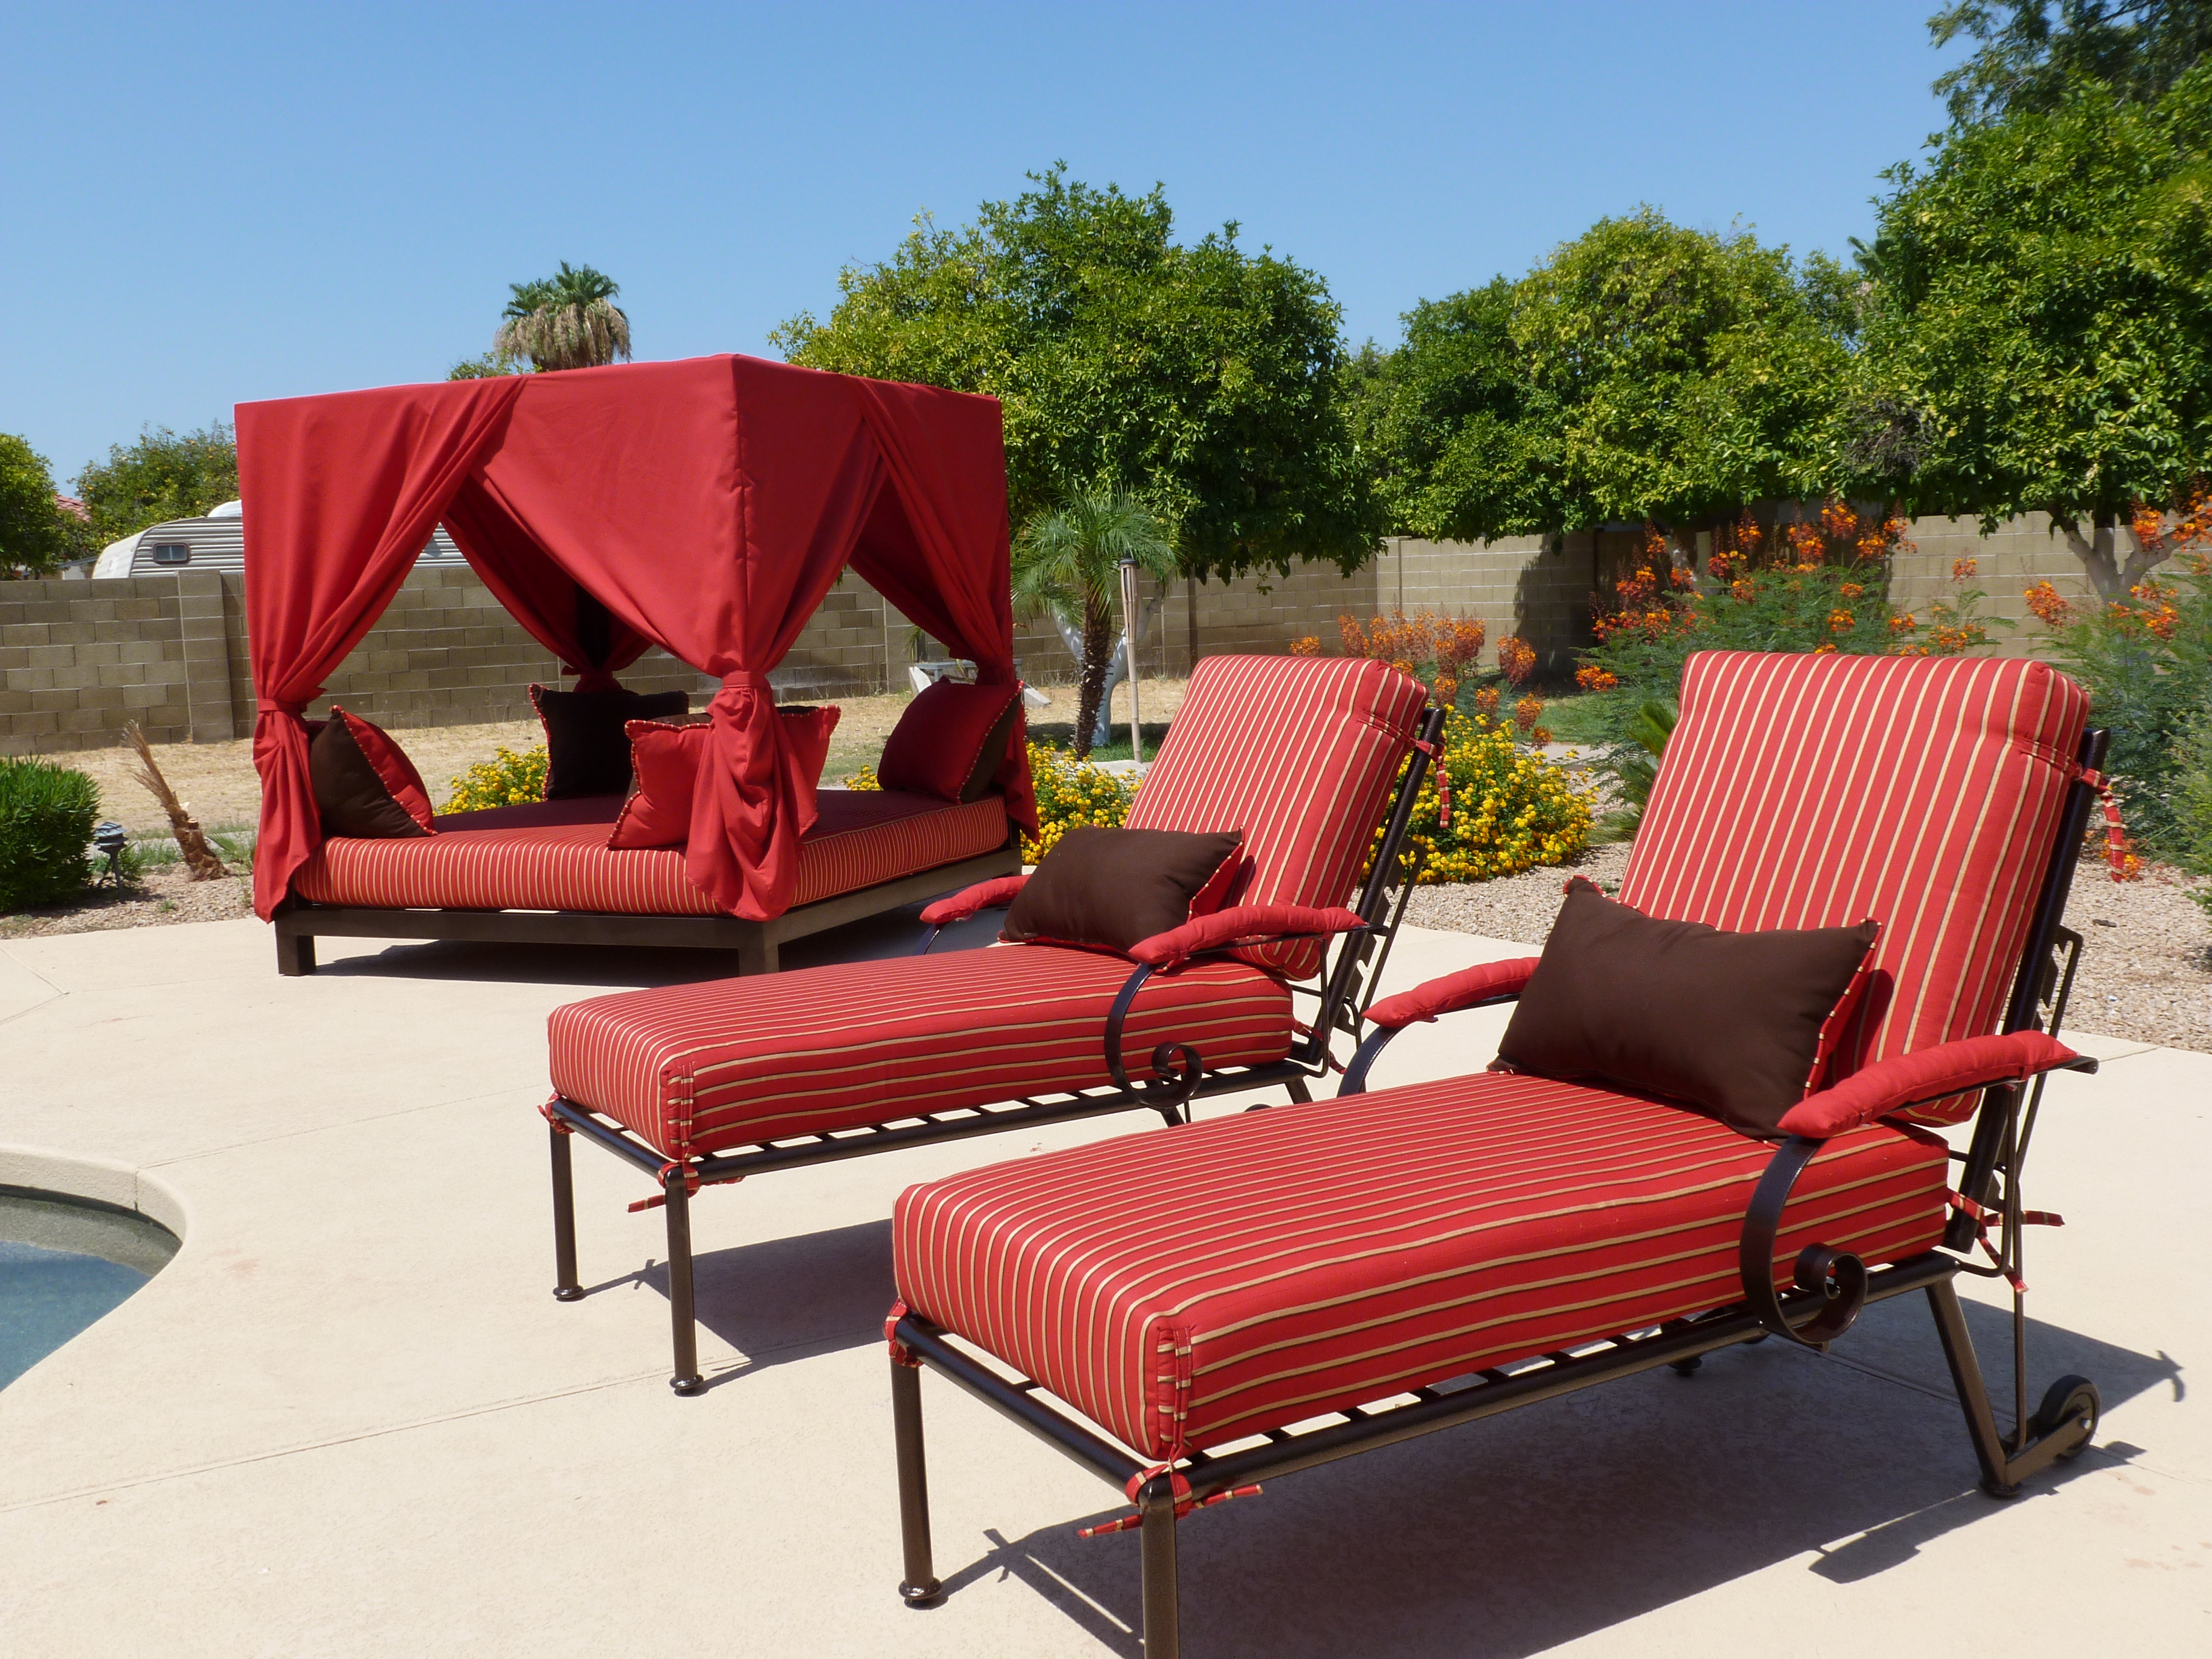 Outdoor Furniture Arizonaironfurniture intended for dimensions 4320 X 3240